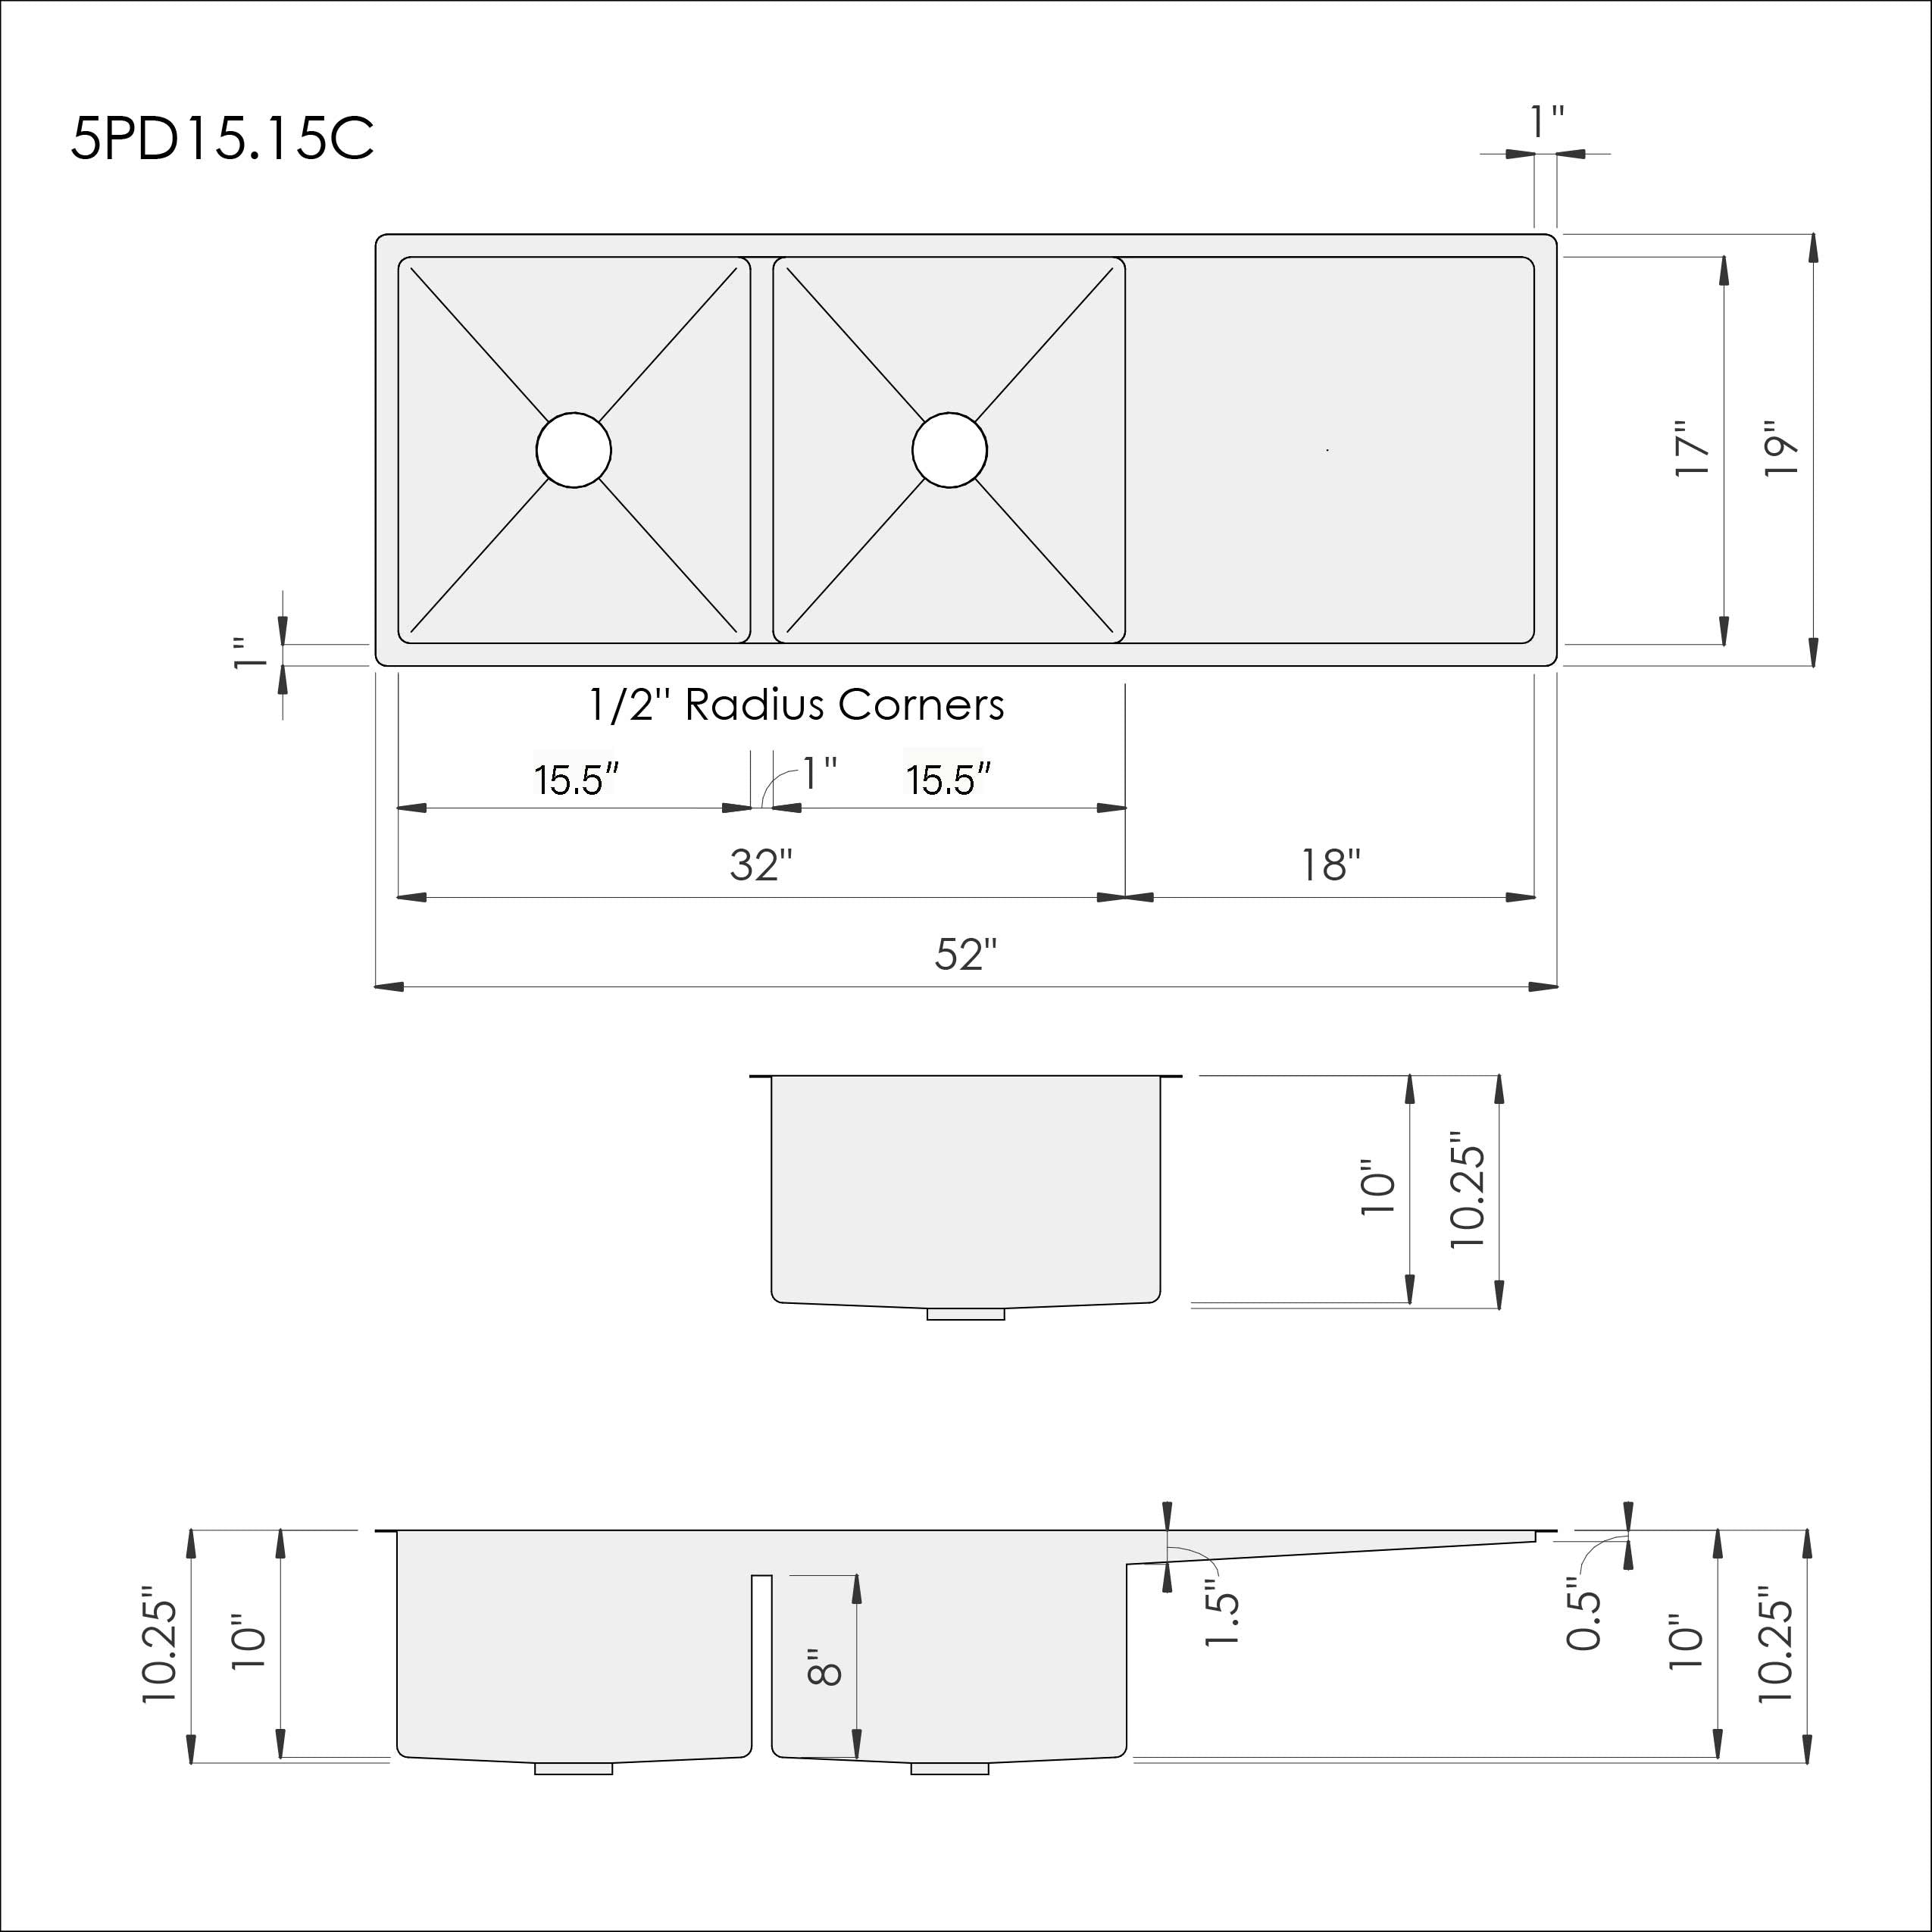 Dimensions of Create Good Sinks' 52 inch double bowl undermount drainboard sink. Stainless steel kitchen sink with built in drainboard and reversible drains